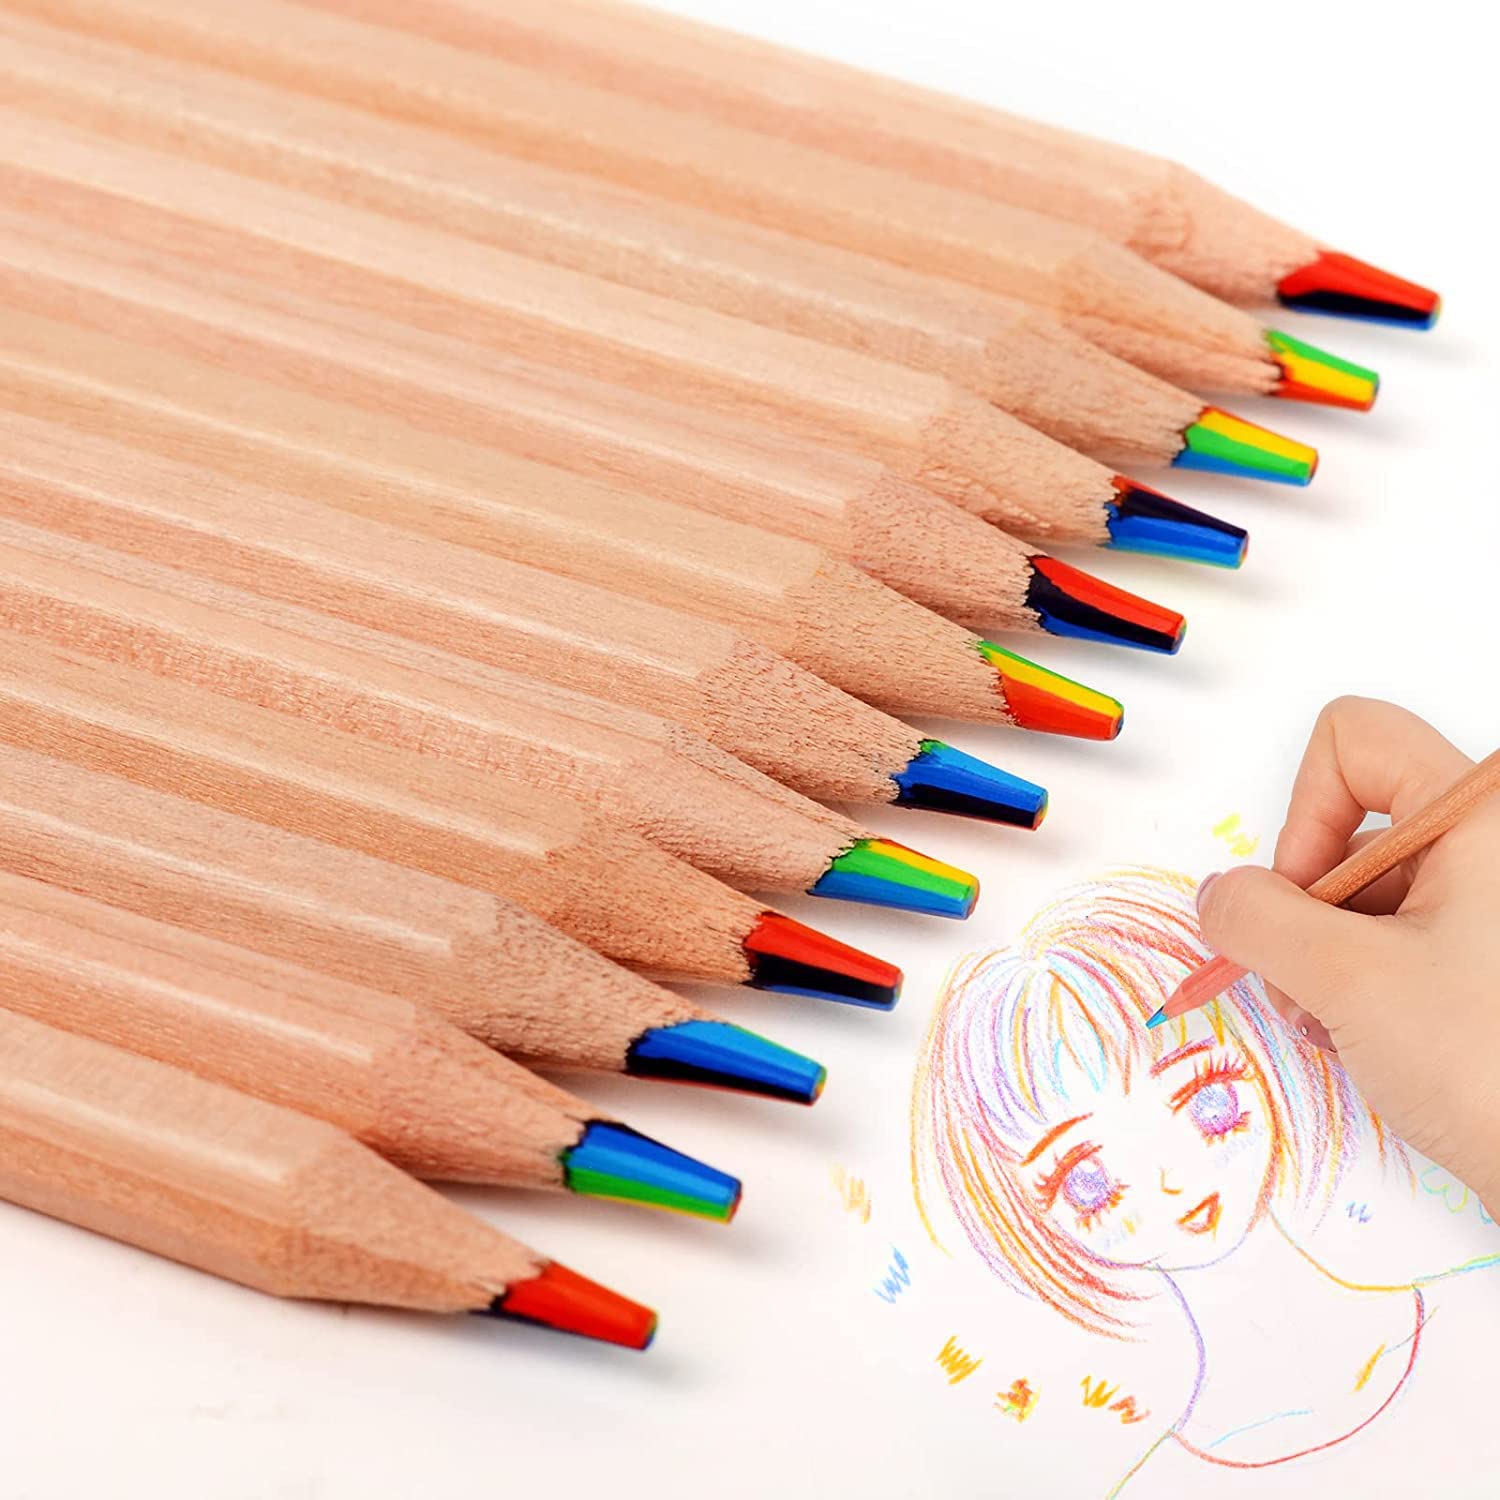 30 Pieces Rainbow Colored Pencils, 7 Color in 1 Pencils for Kids, Assorted Colors for Drawing Coloring Sketching Pencils For Drawing Stationery, Bulk, Pre-sharpened - image 4 of 6